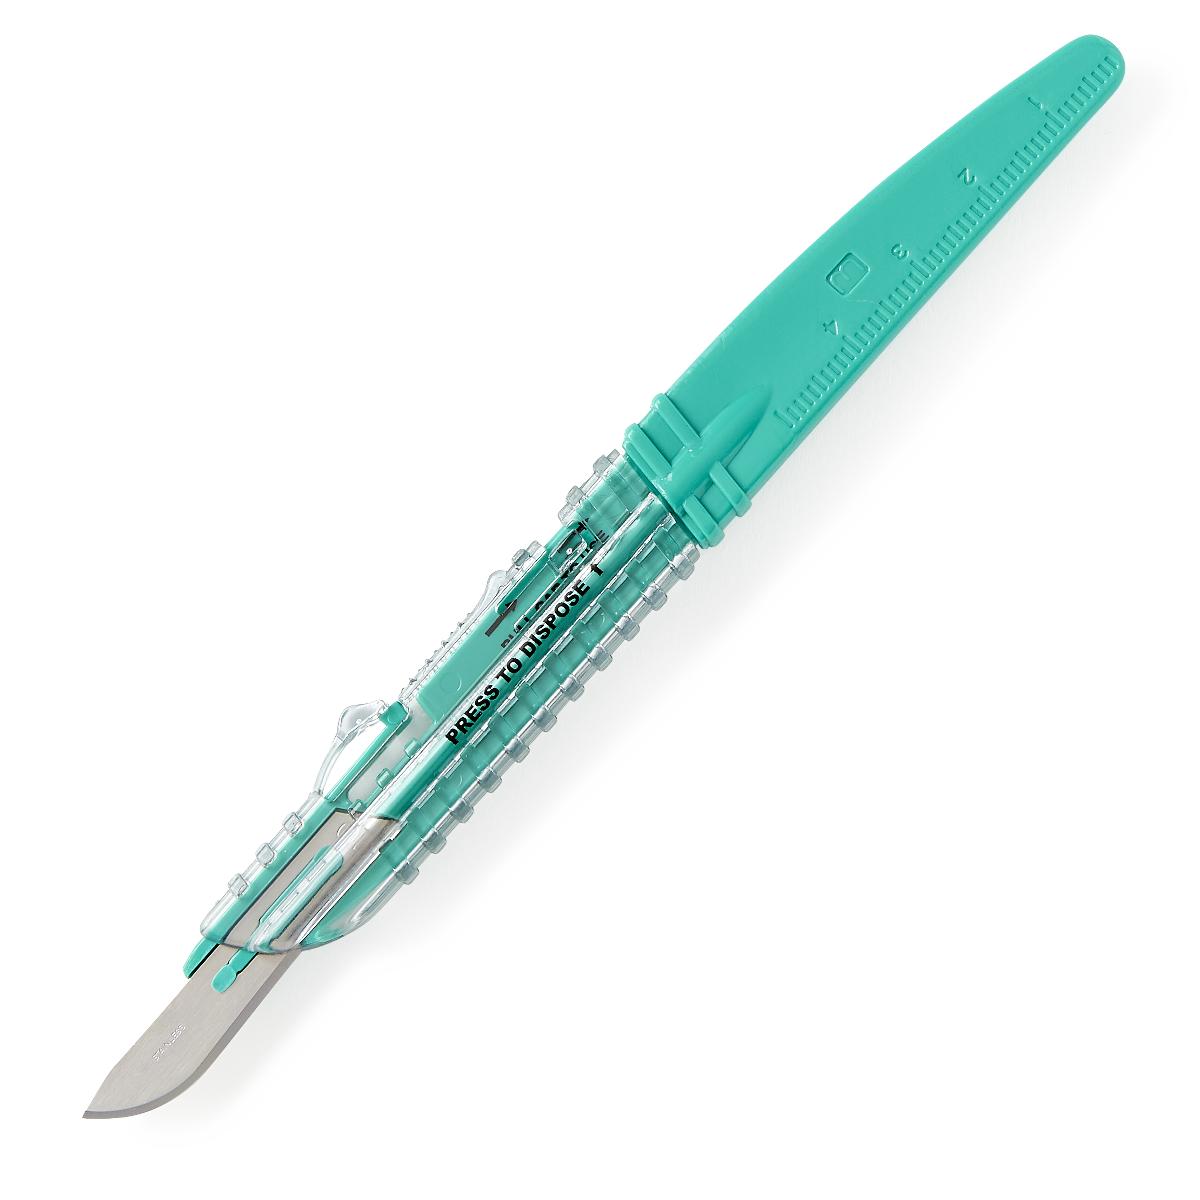 Disposable Surgical Safety Scalpels